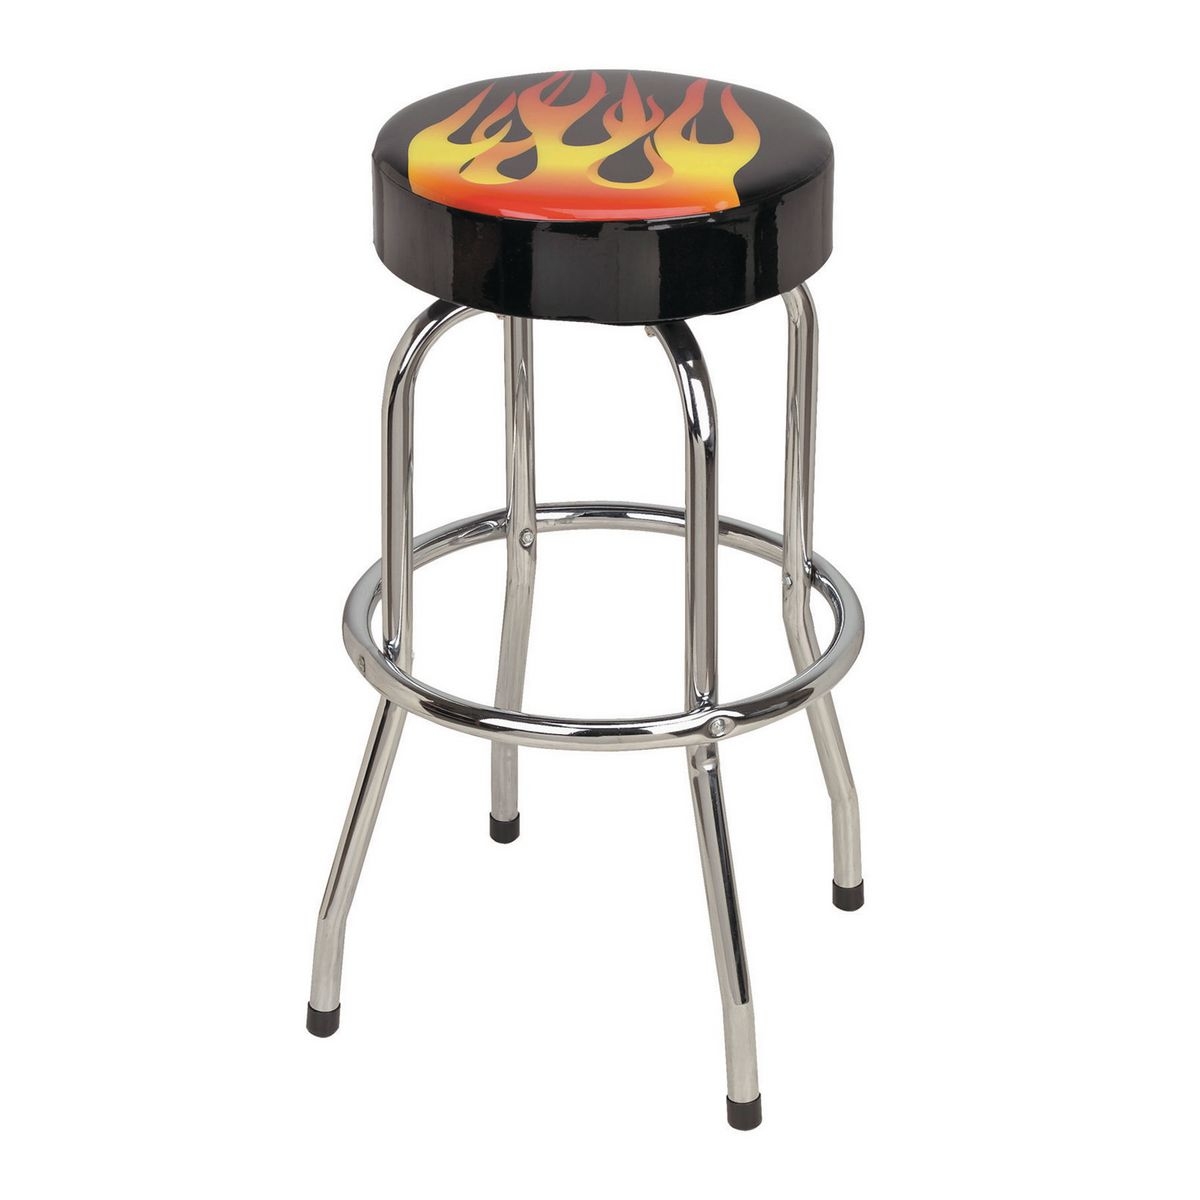 PITTSBURGH AUTOMOTIVE Bar/Counter Swivel Stool with Flame Design - Item 91200 / 62202